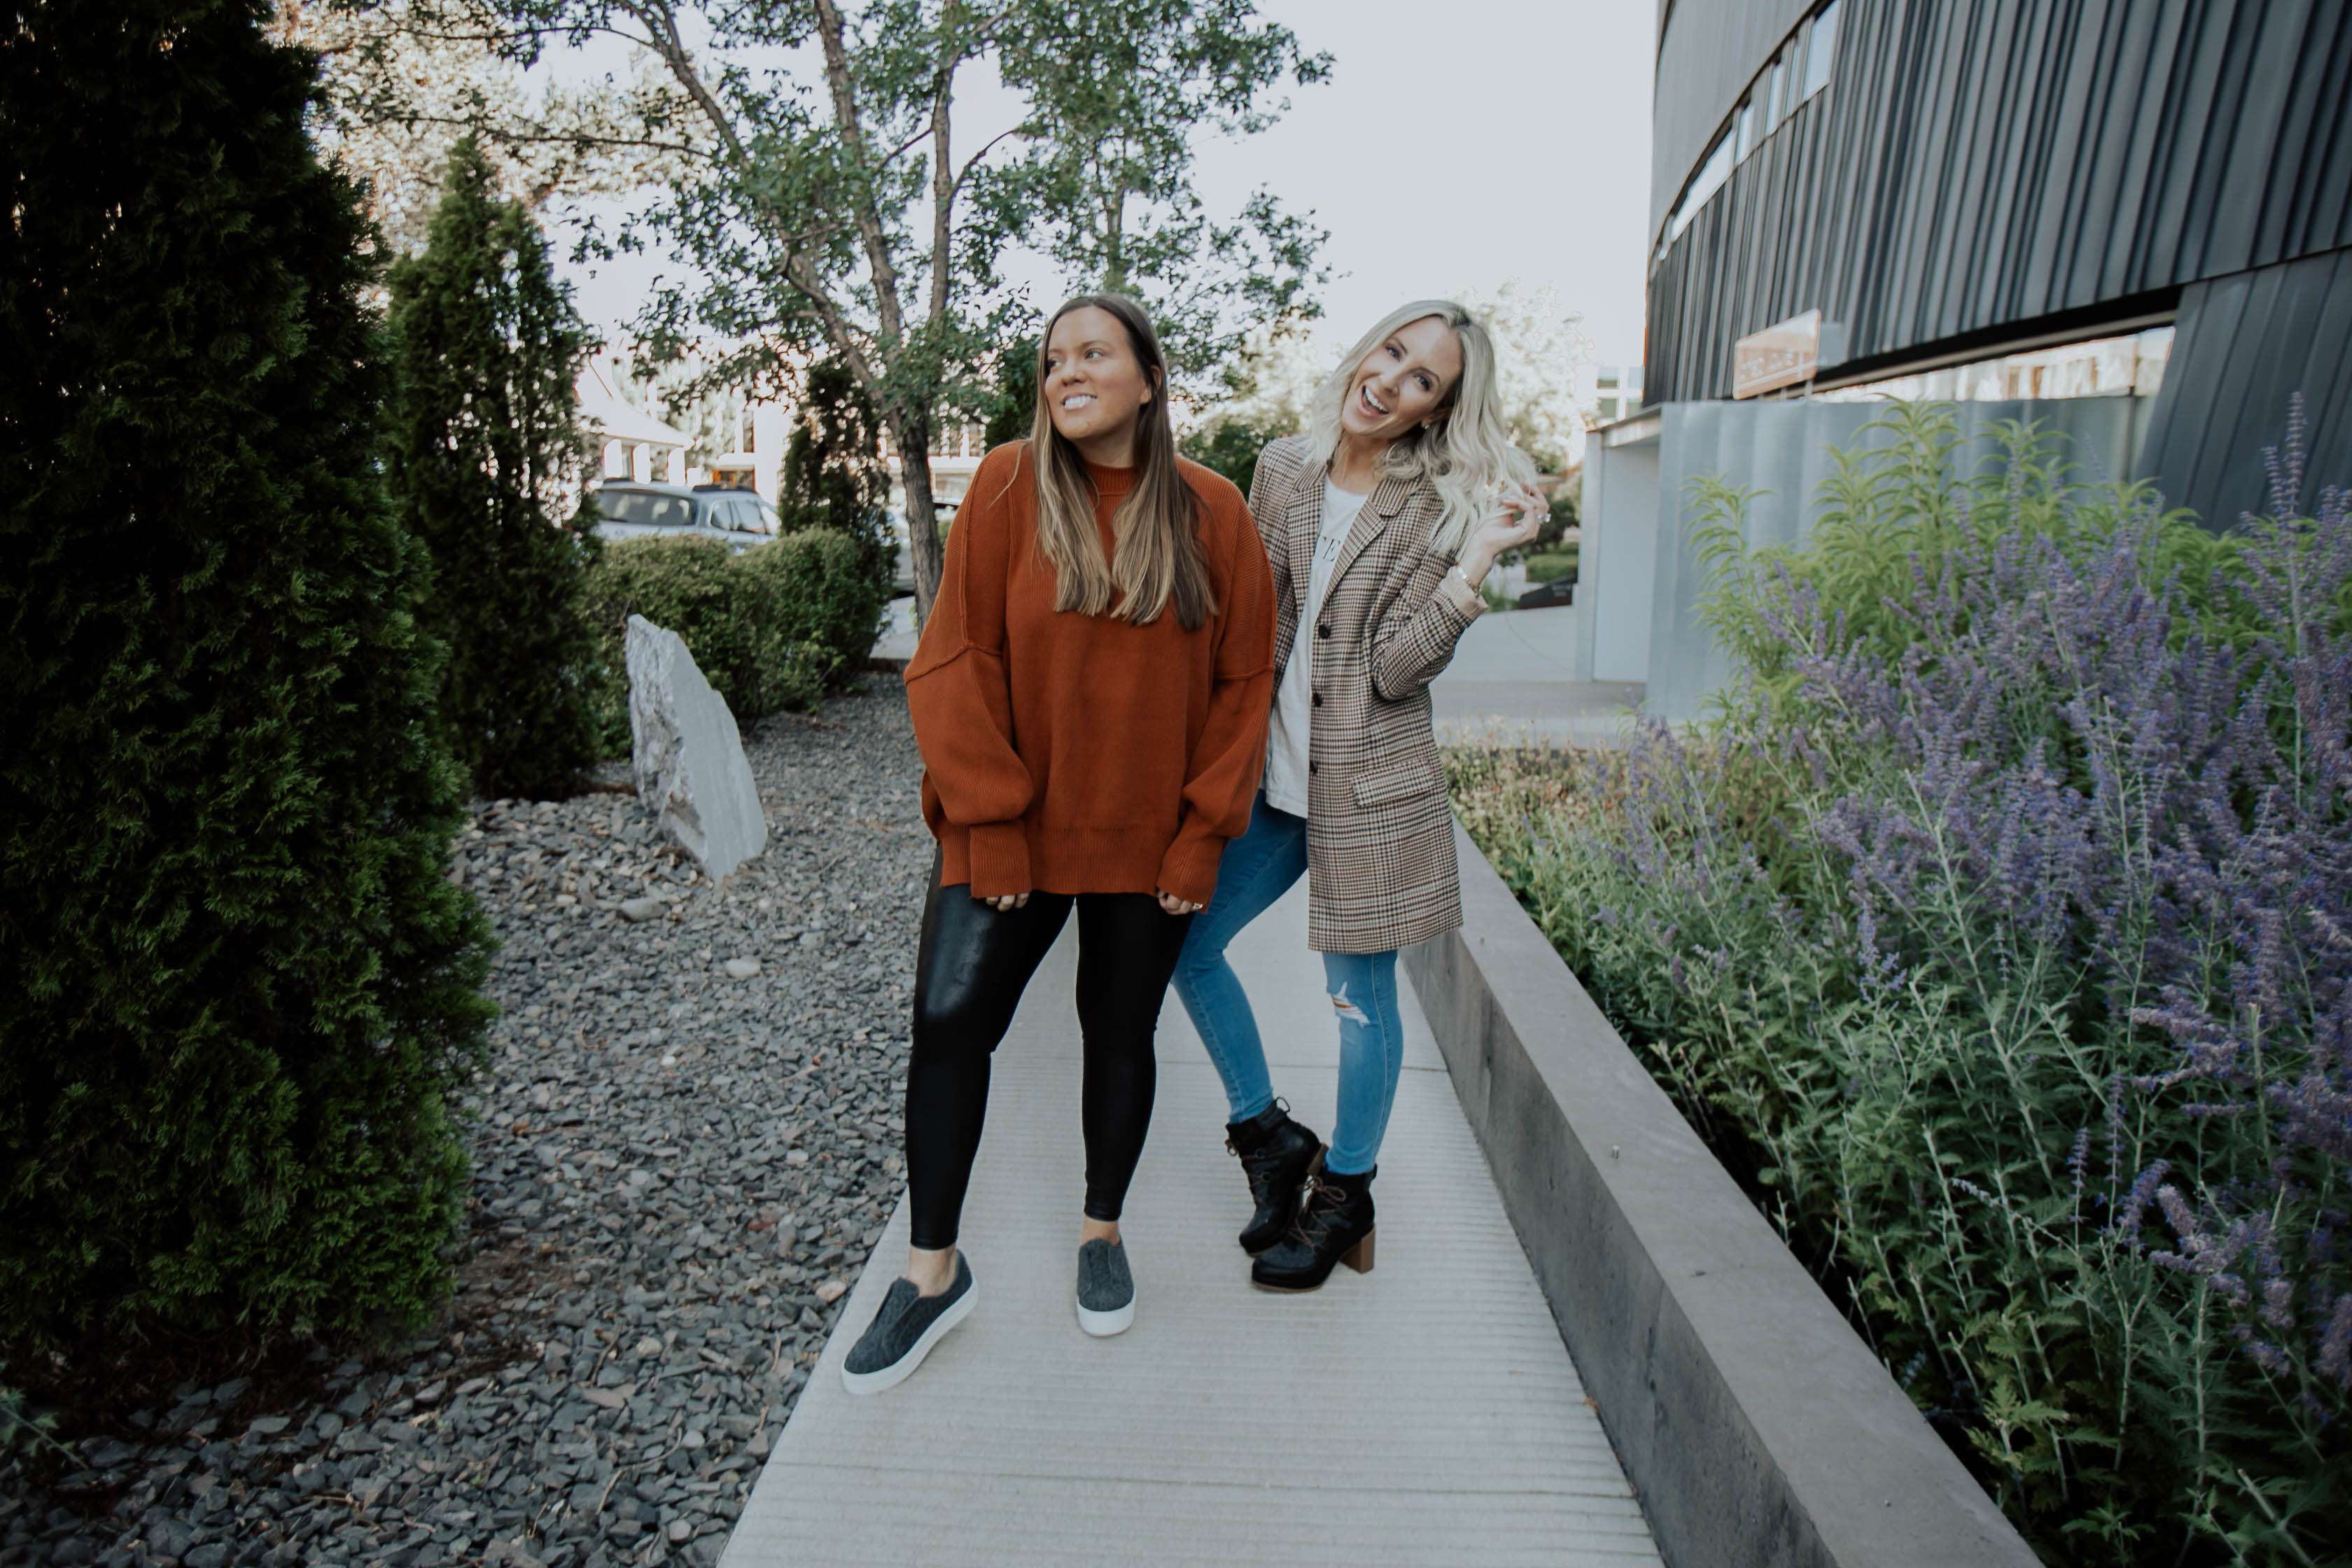 Fashion Bloggers Emily Farren Wieczorek and Ashley Zeal of Two Peas in a Prada talk about their favorite fall looks from Trendsend with Evereve!